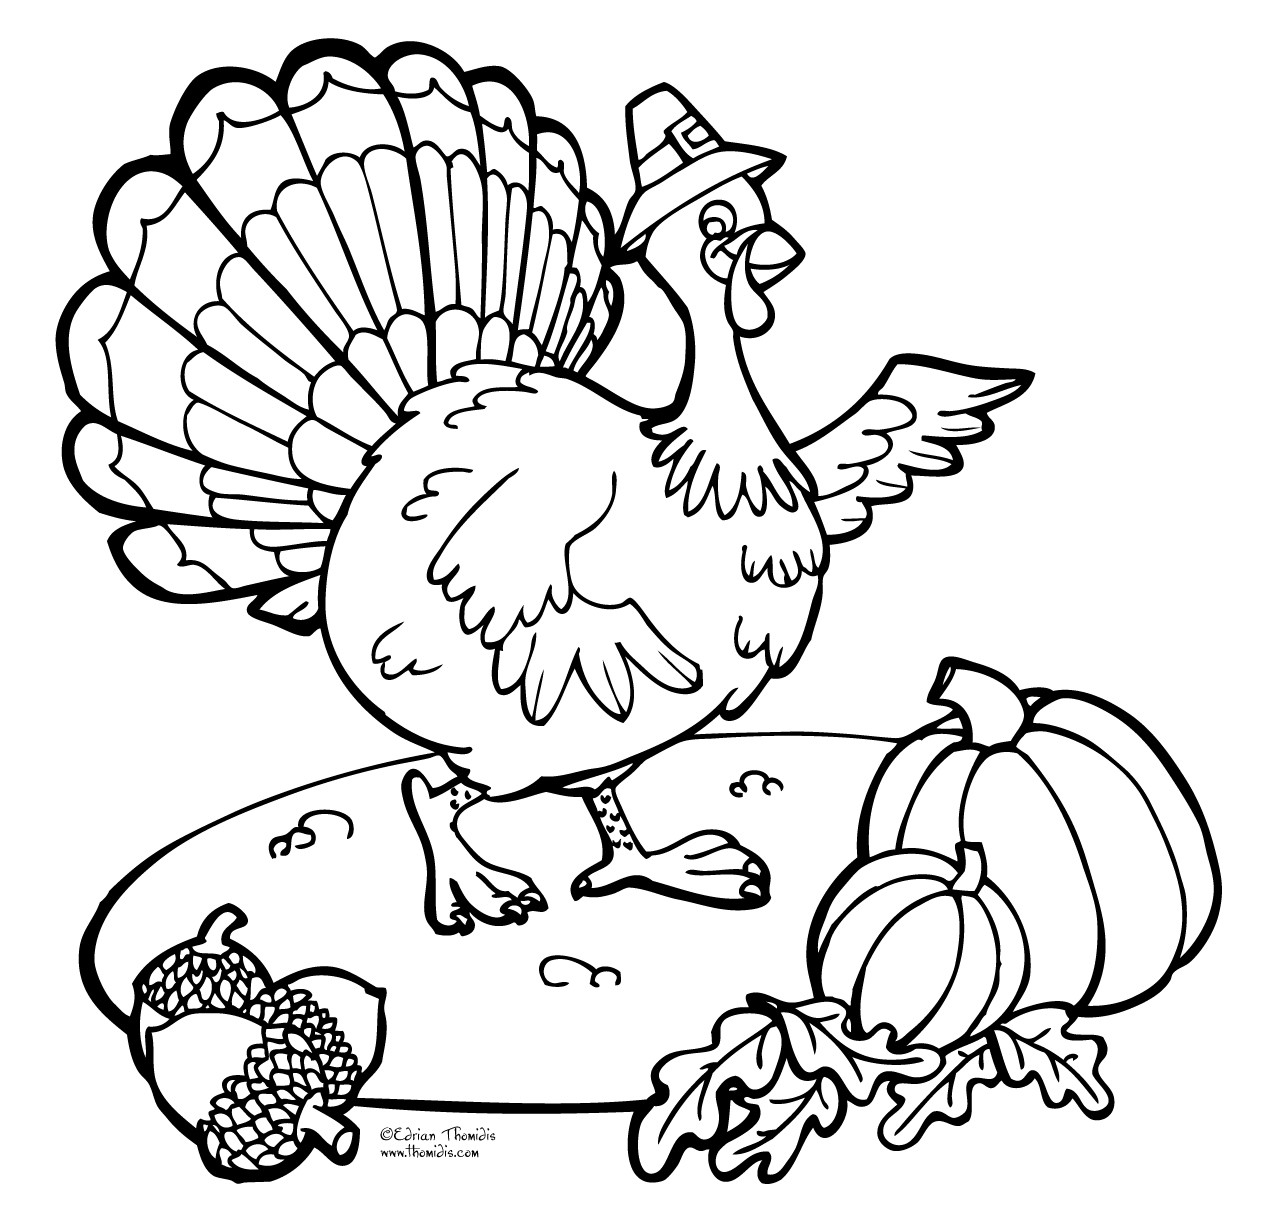 Free Printable Thanksgiving Coloring Pages
 A picture paints a thousand words November 2010